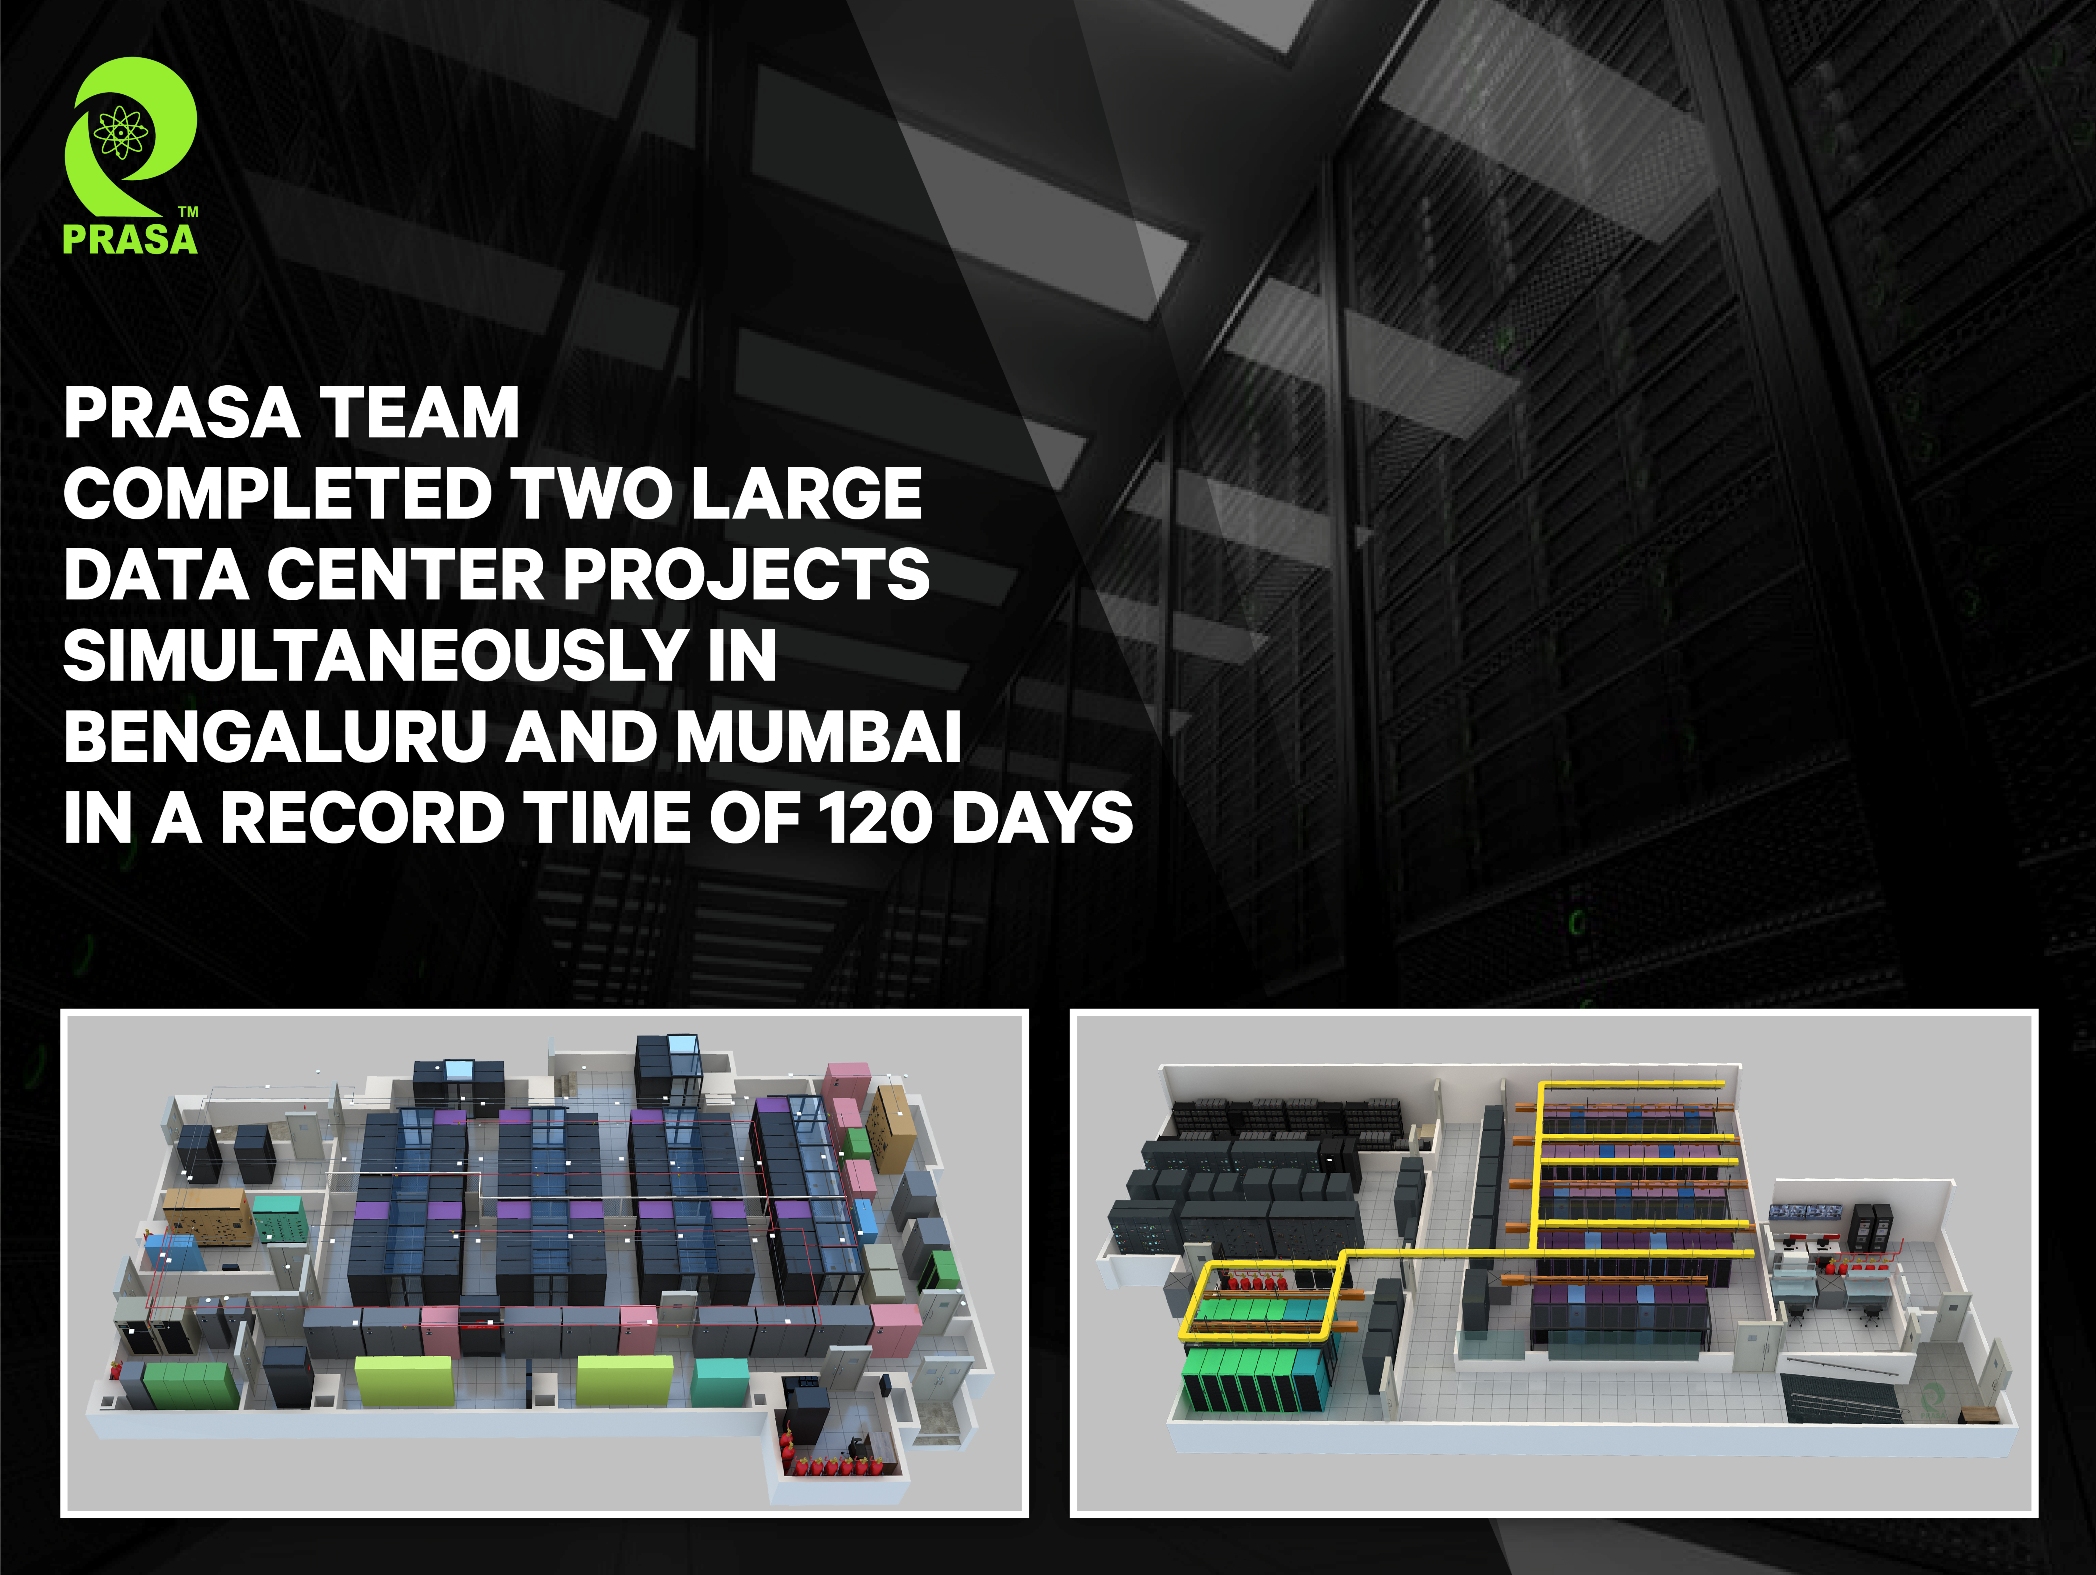 PRASA team completed two large data center projects simultaneously in Bengaluru and Mumbai in a record time of 120 days